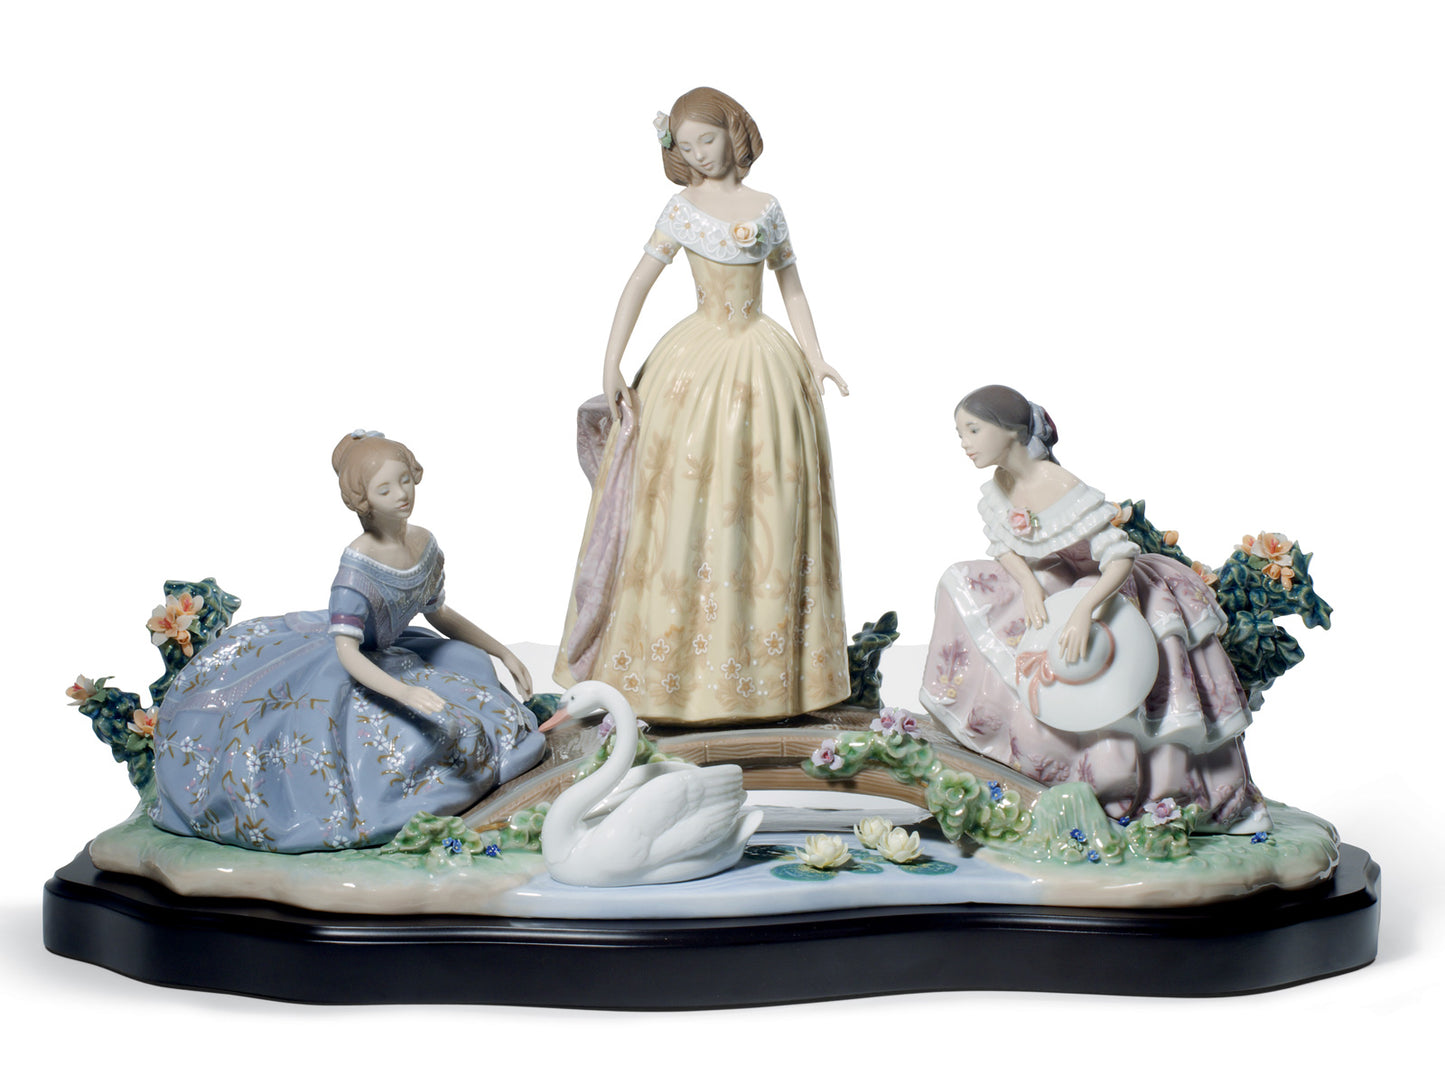 Lladro Daydreaming by the Pond (Limited Edition of 1500)